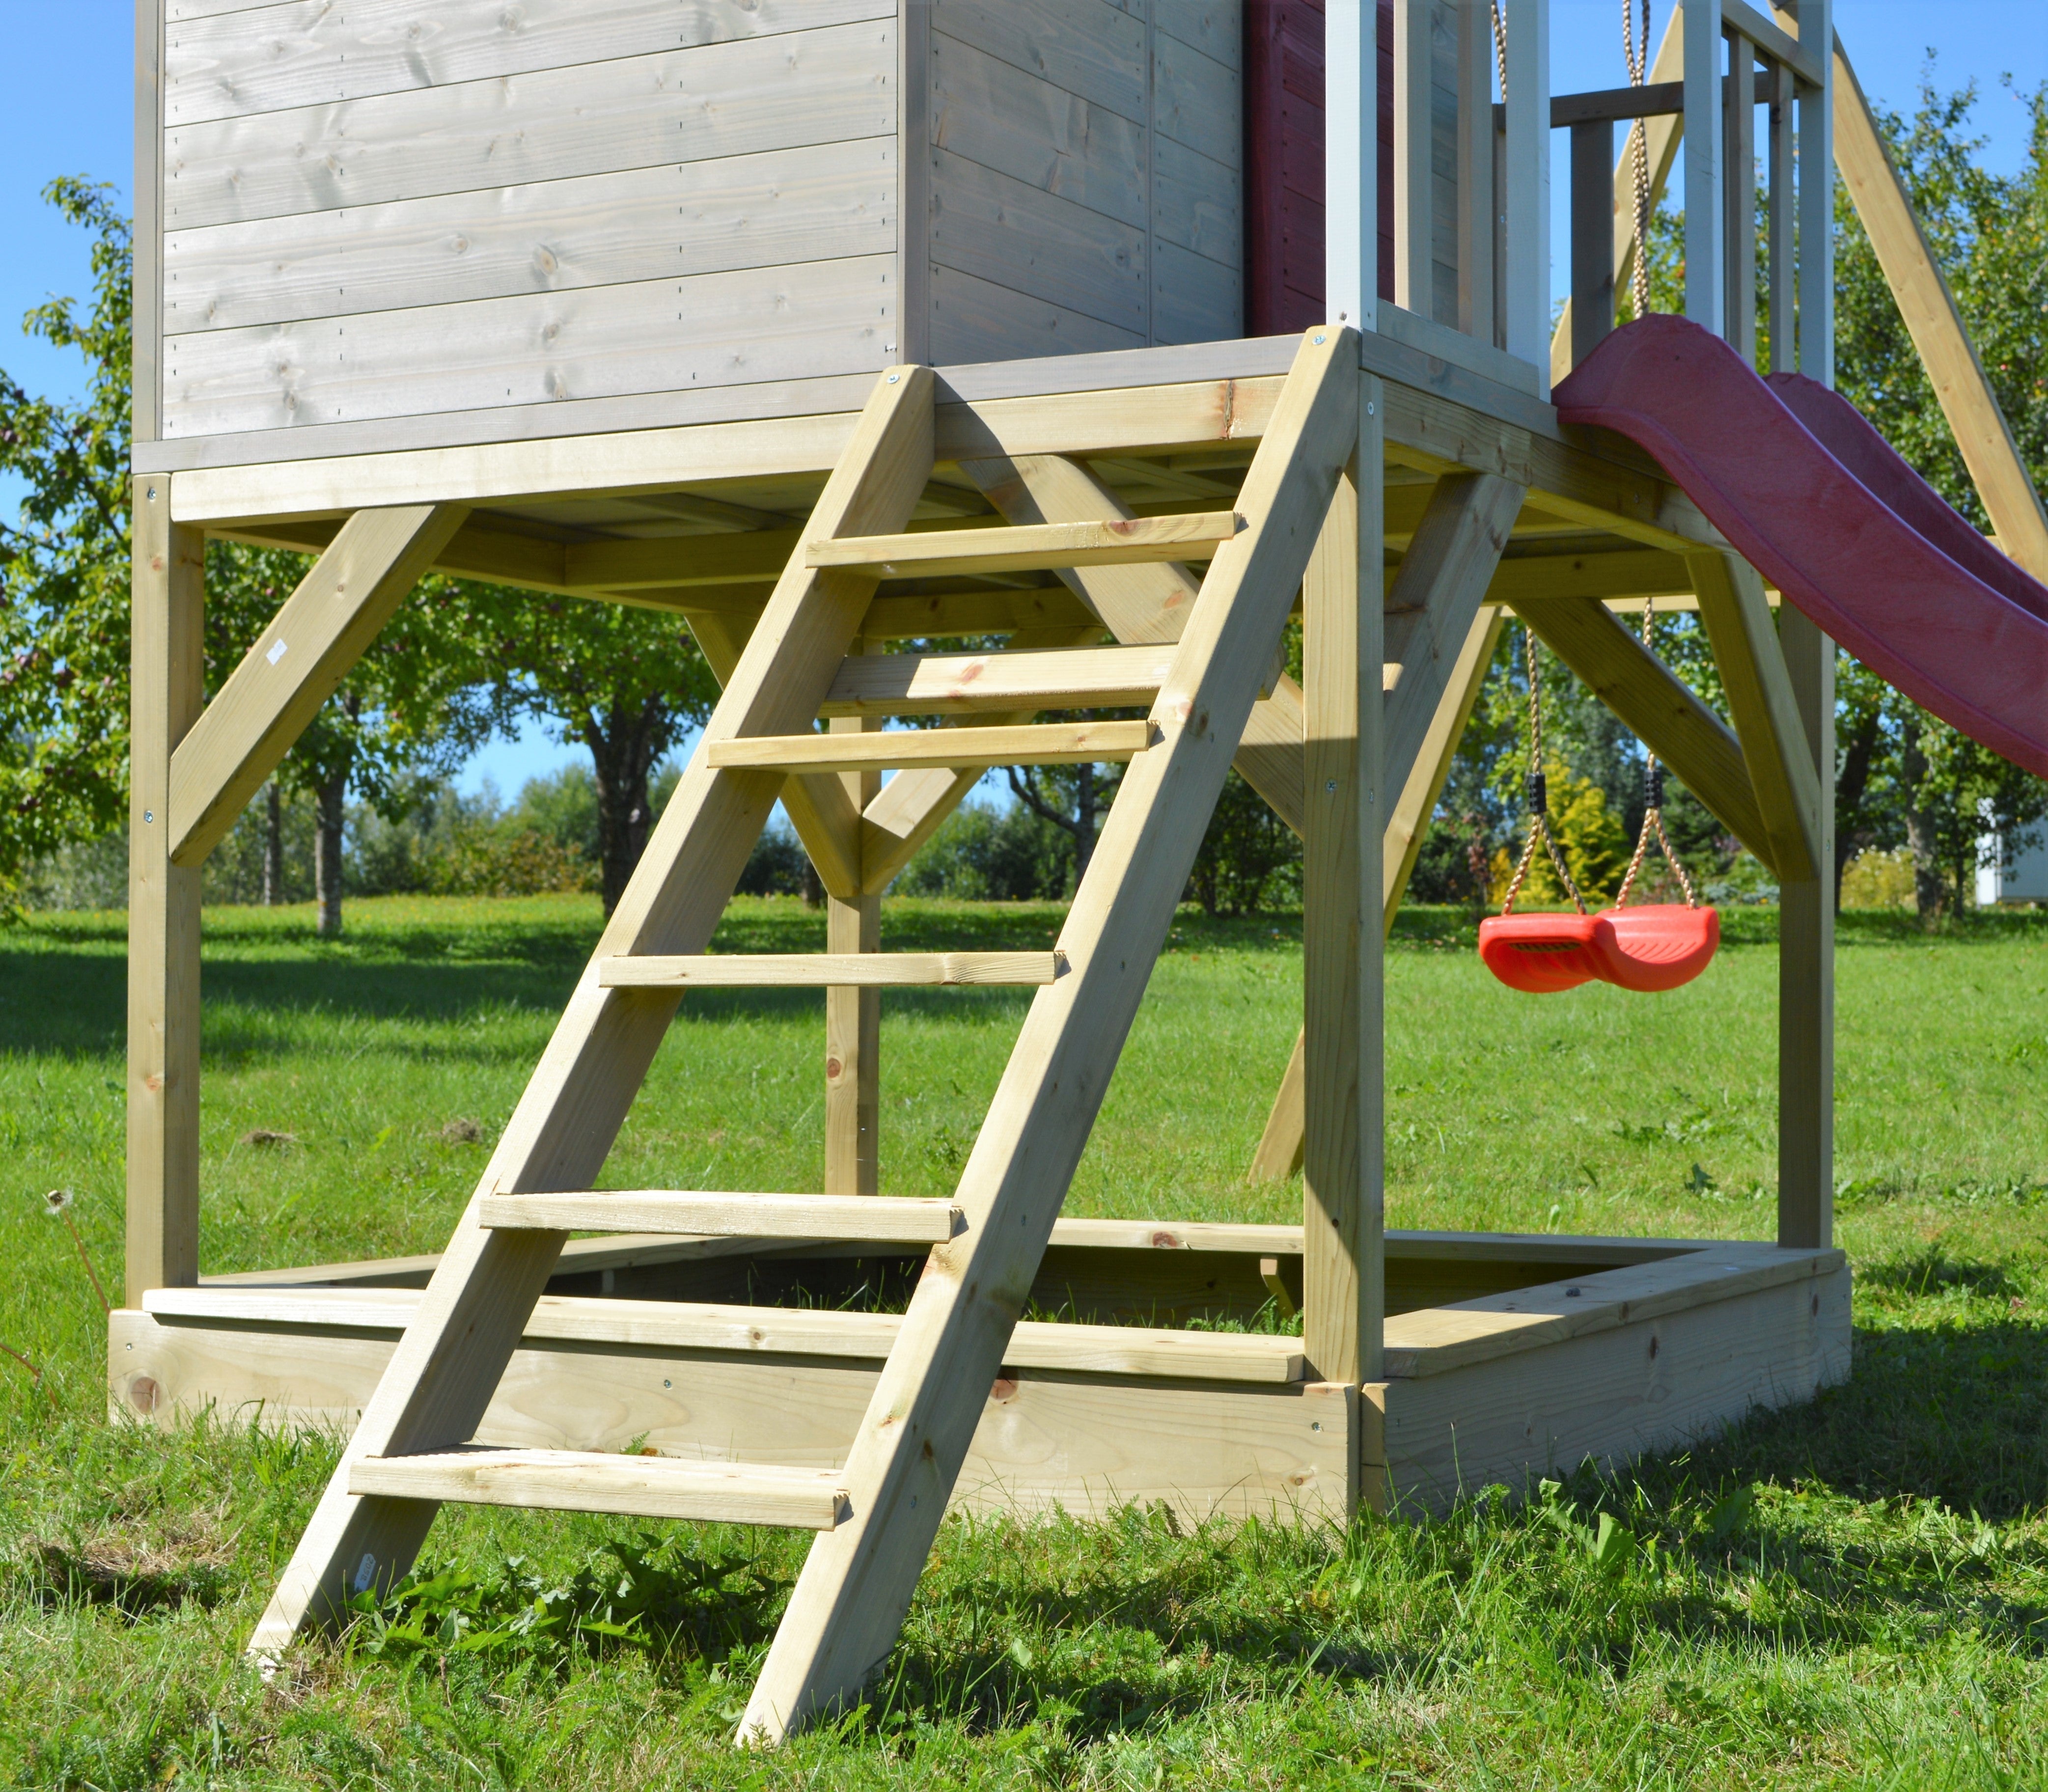 M29R-G Summer Adventure House with Platform, Slide and Double Swing + Gym Attachment